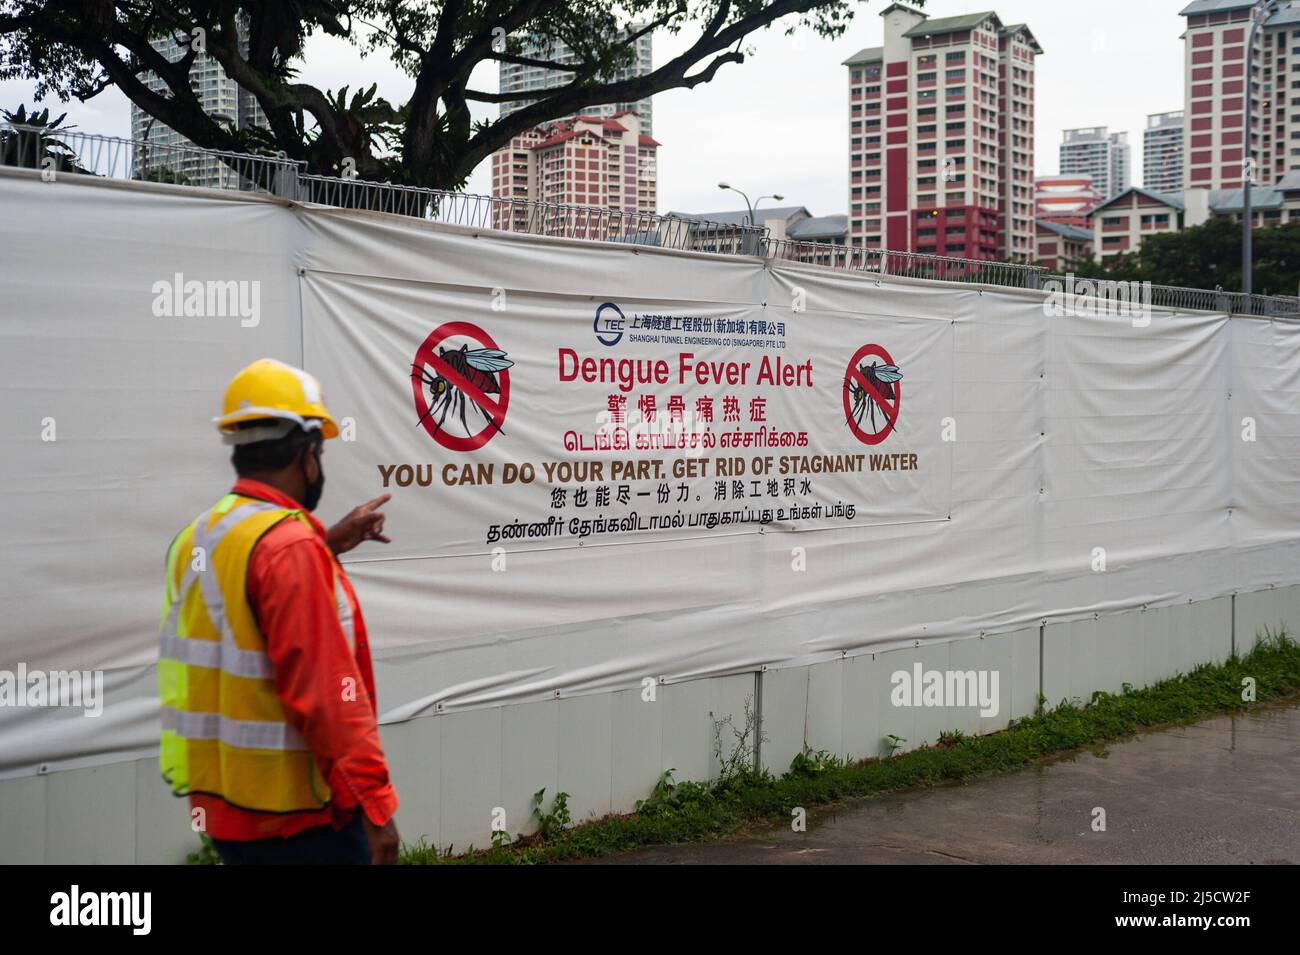 Dec. 14, 2020, Singapore, Republic of Singapore, Asia - A worker walks past a construction site in a residential neighborhood where a large banner on the construction fence warns of the risk of spreading and contracting dengue fever from mosquitoes, as they use standing water like that found on construction sites as possible breeding grounds. [automated translation] Stock Photo